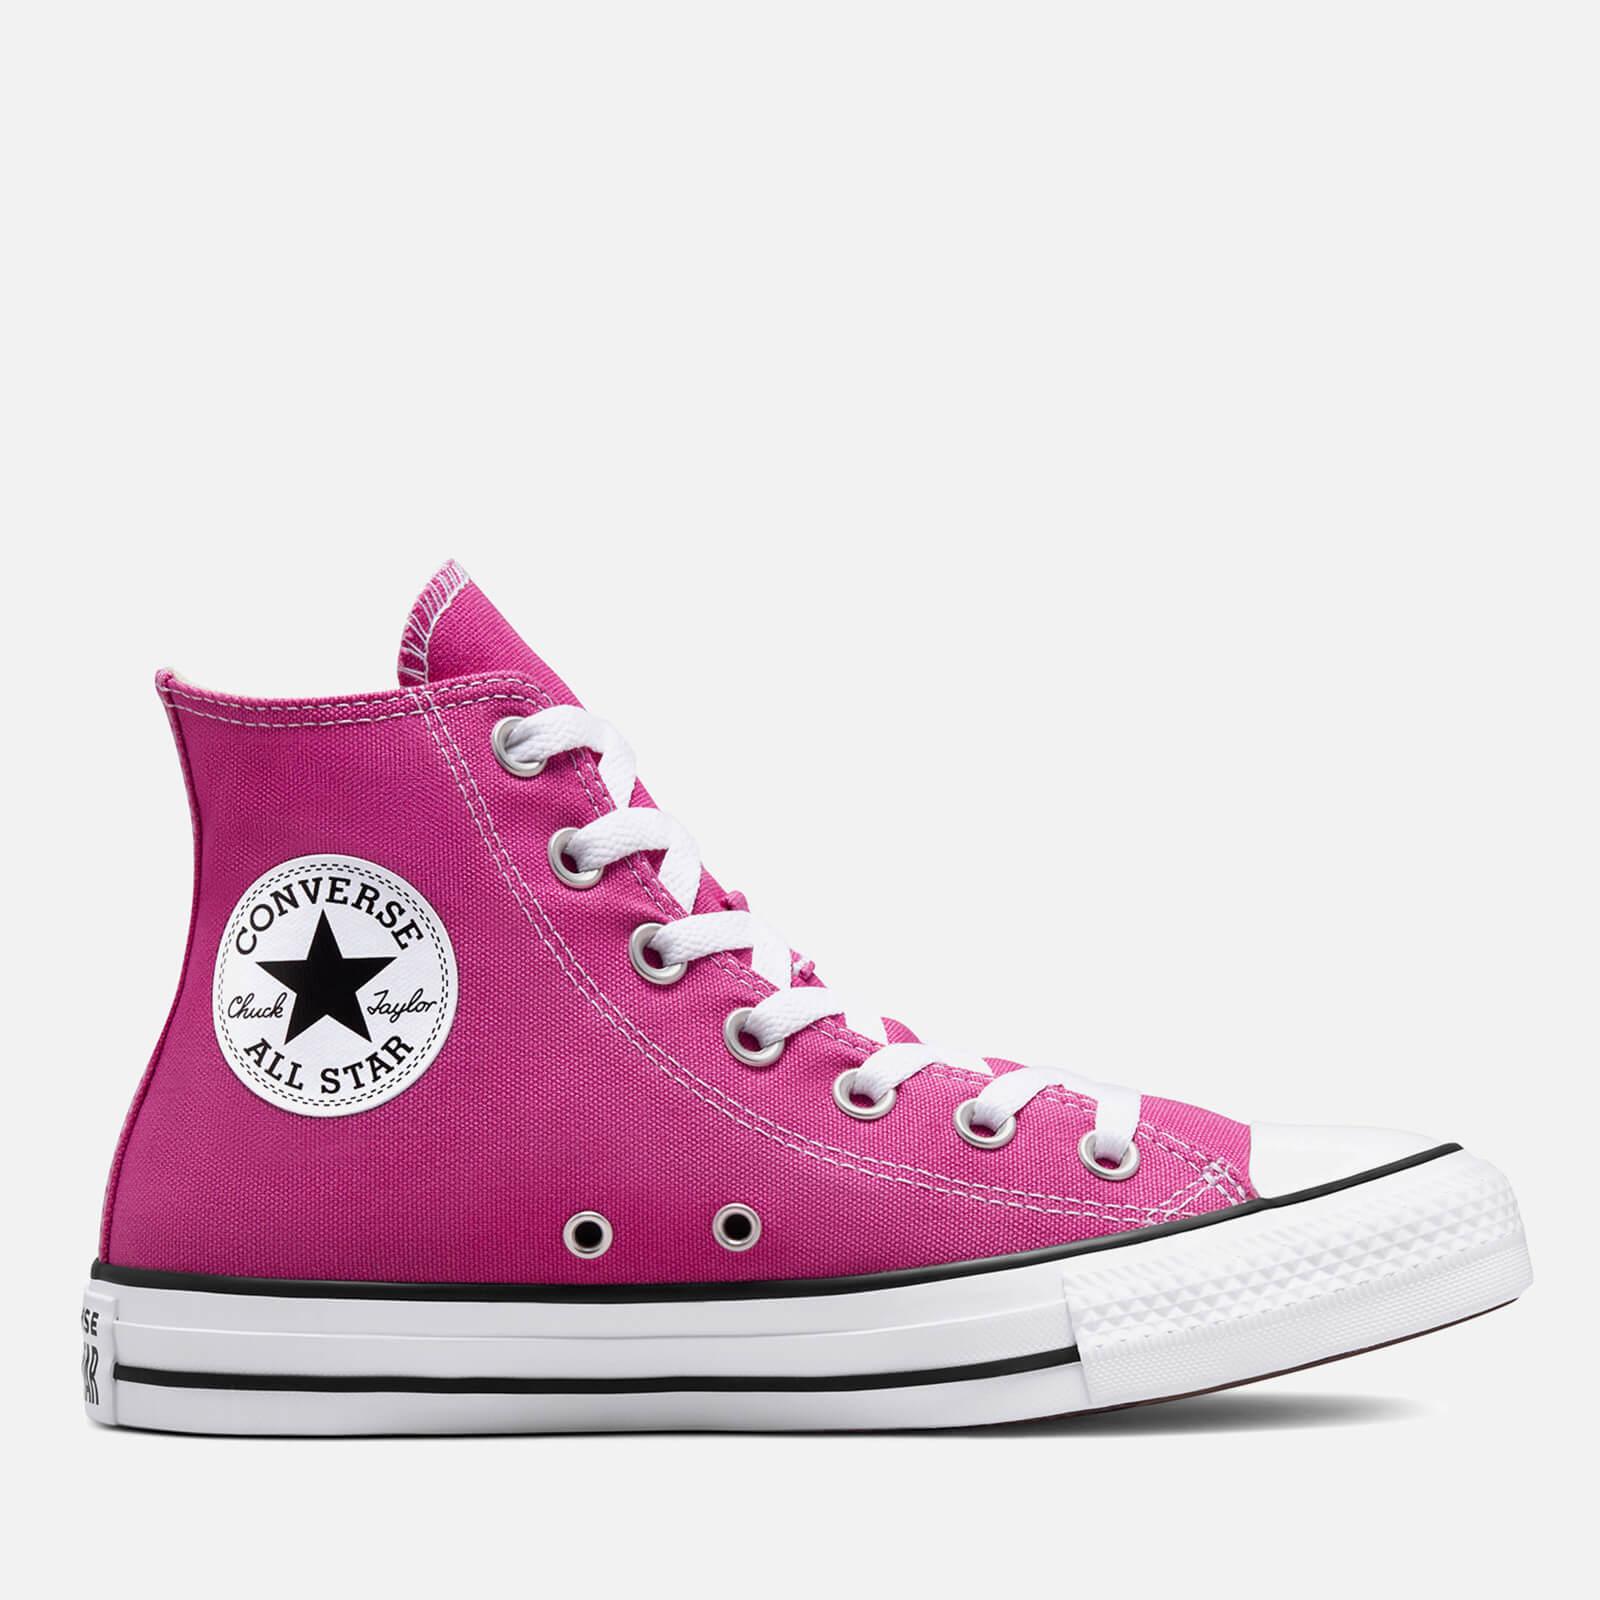 Converse Chuck Taylor All Star Hi-top Canvas Trainers in Pink | Lyst